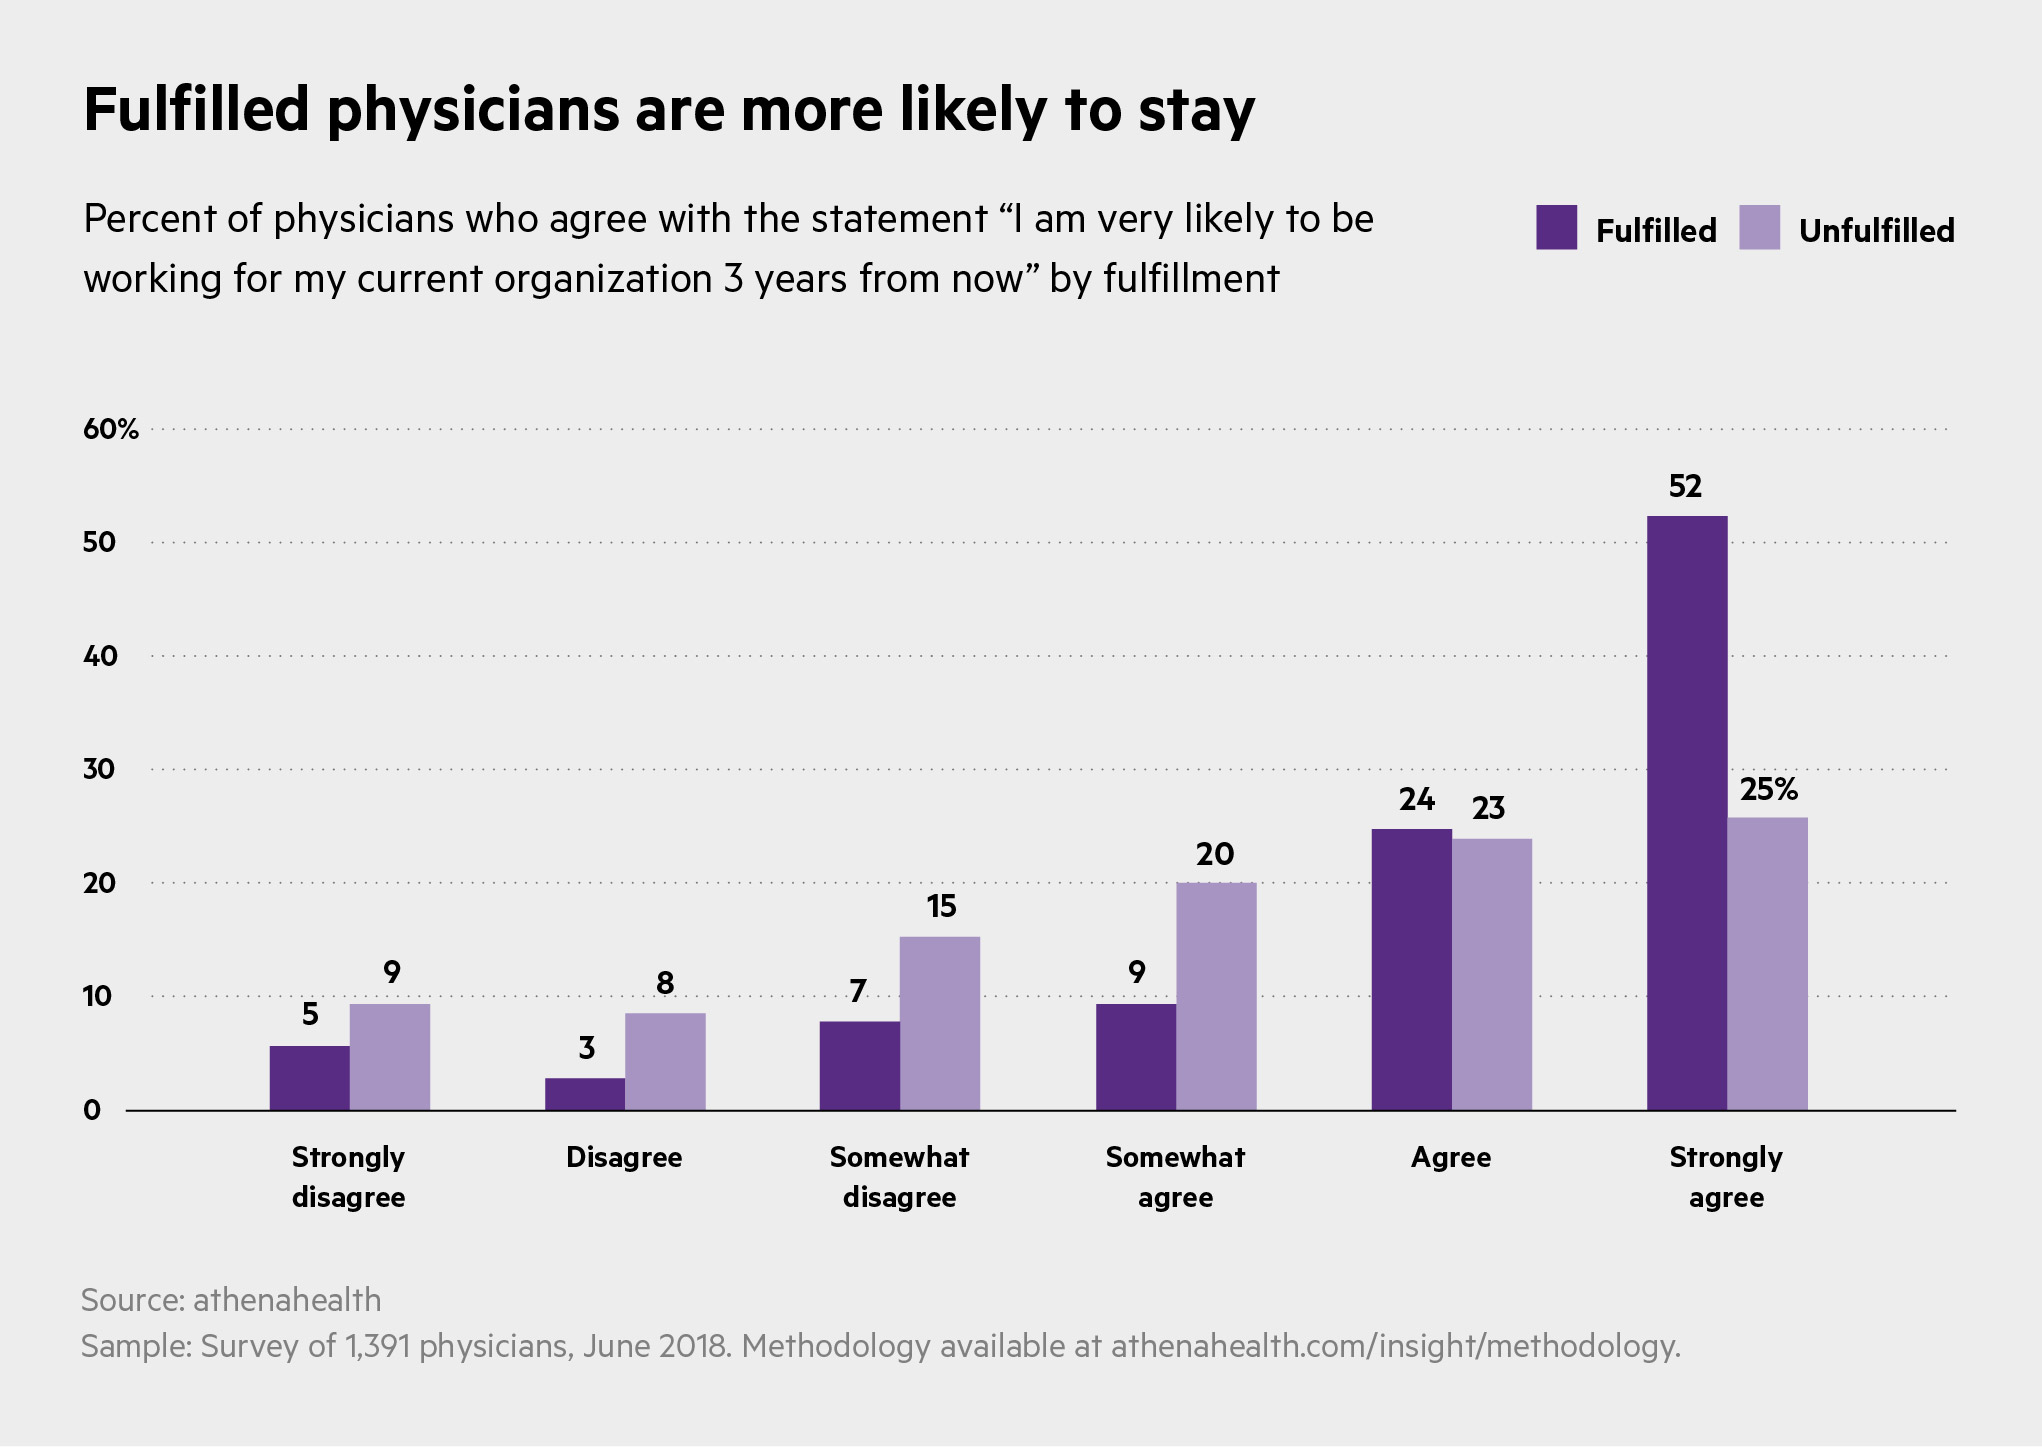 chart on how likely fulfilled and unfulfilled physicians are to leave their organization